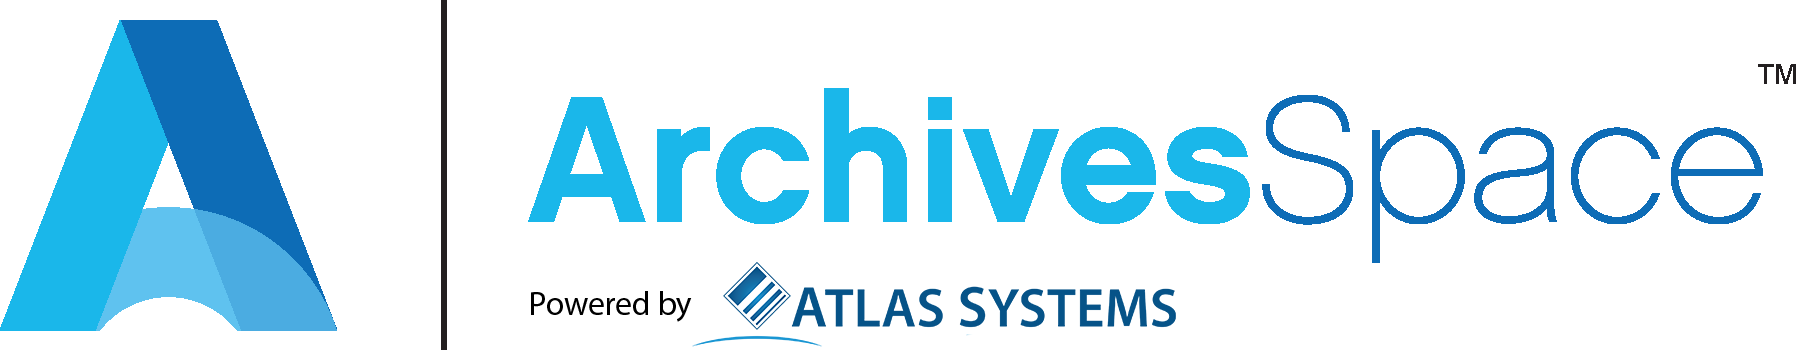 ArchivesSpace - Powered by Atlas Systems